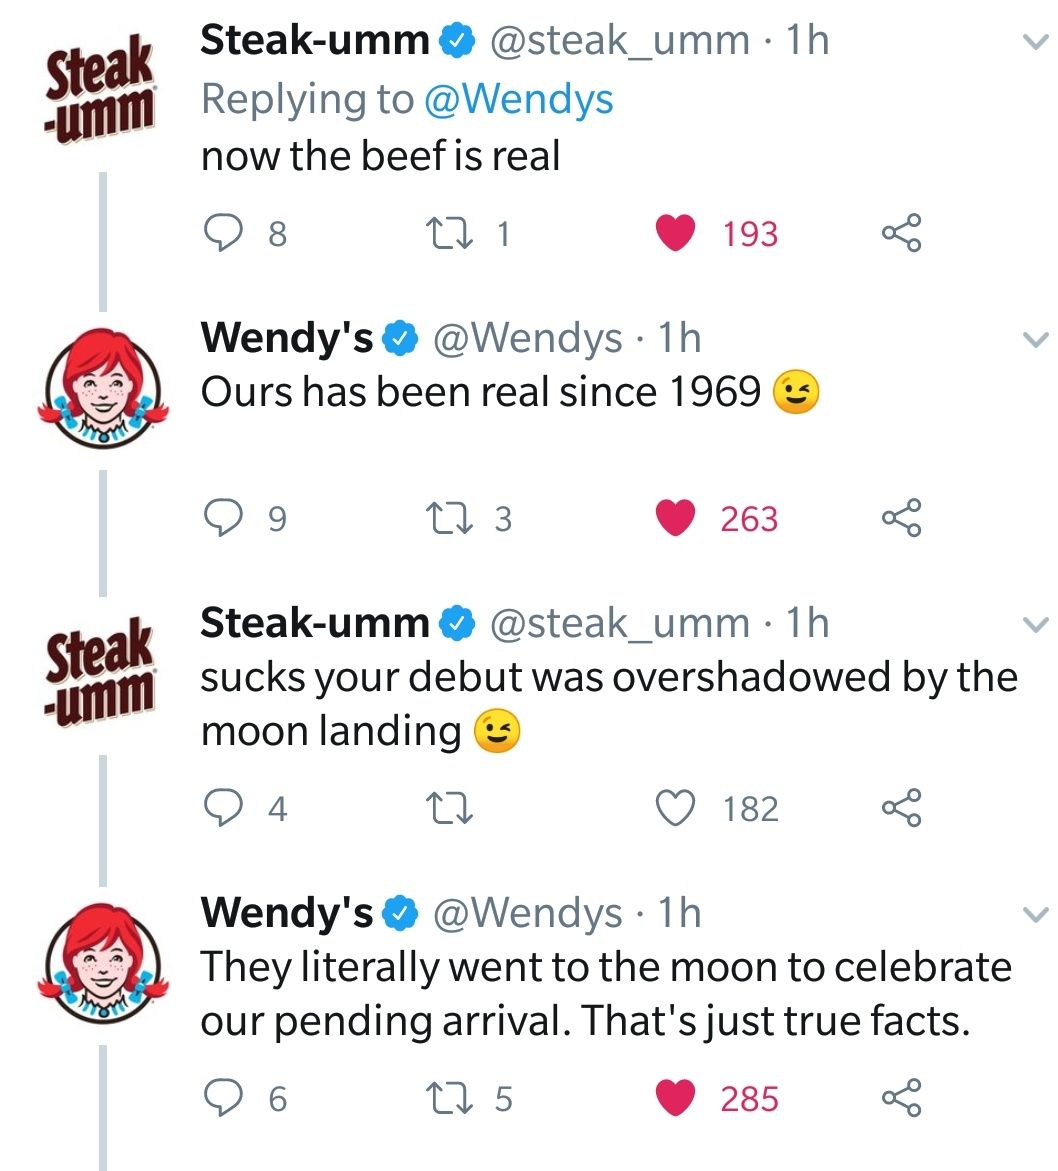 People are having poll for whose Twitter is better between Wendy's and Steak-umm. This is one of the conversation.